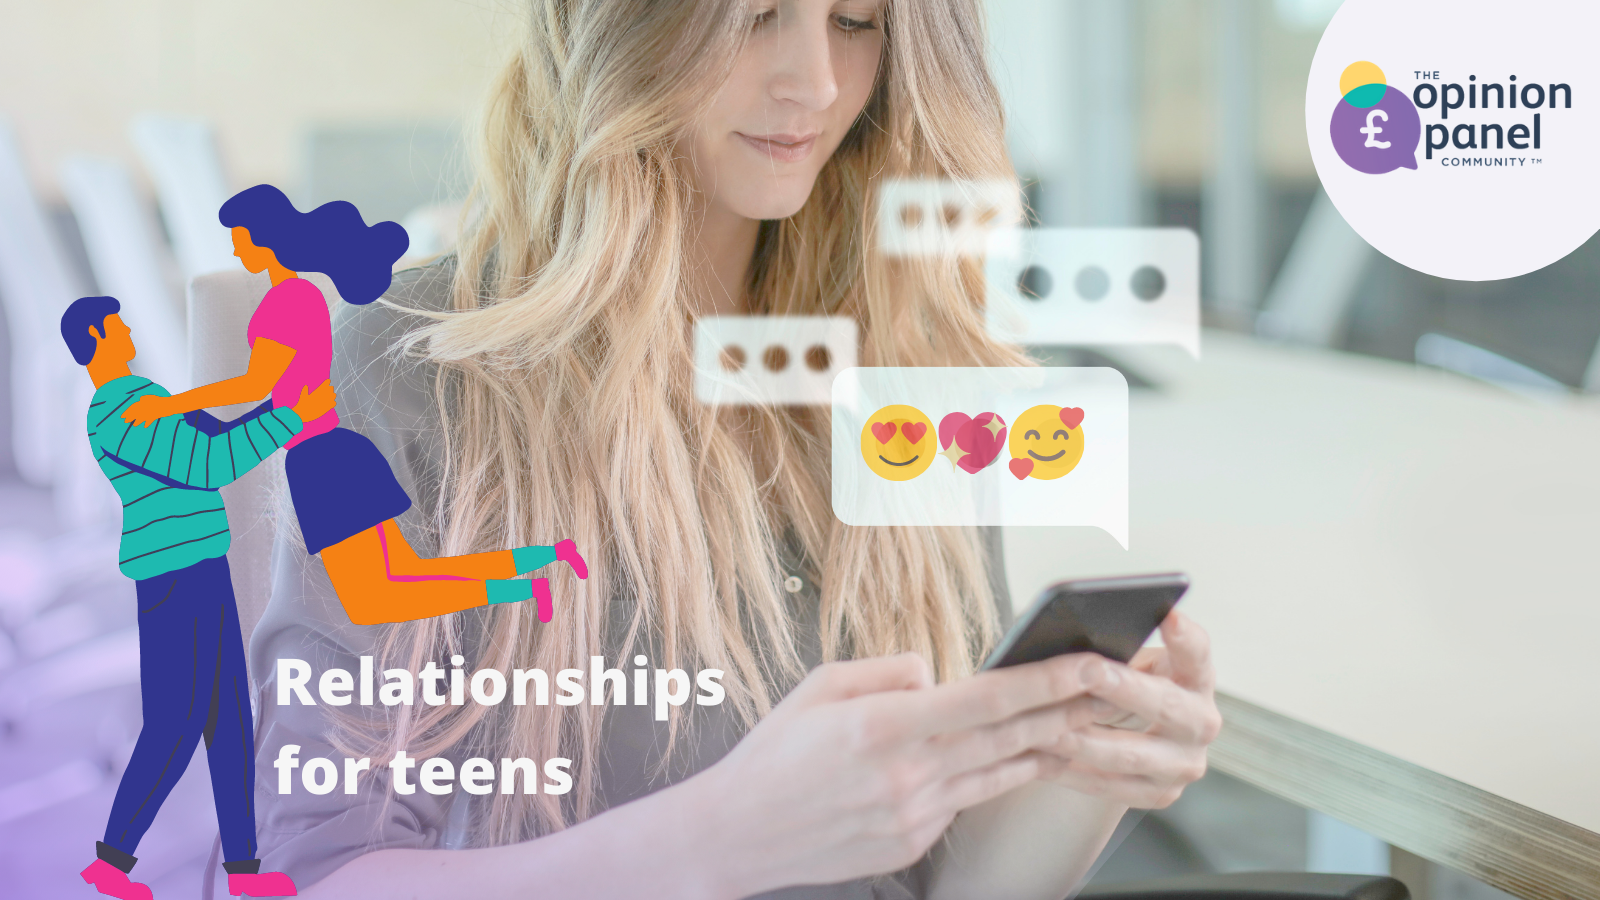 Article image - relationships for teenagers